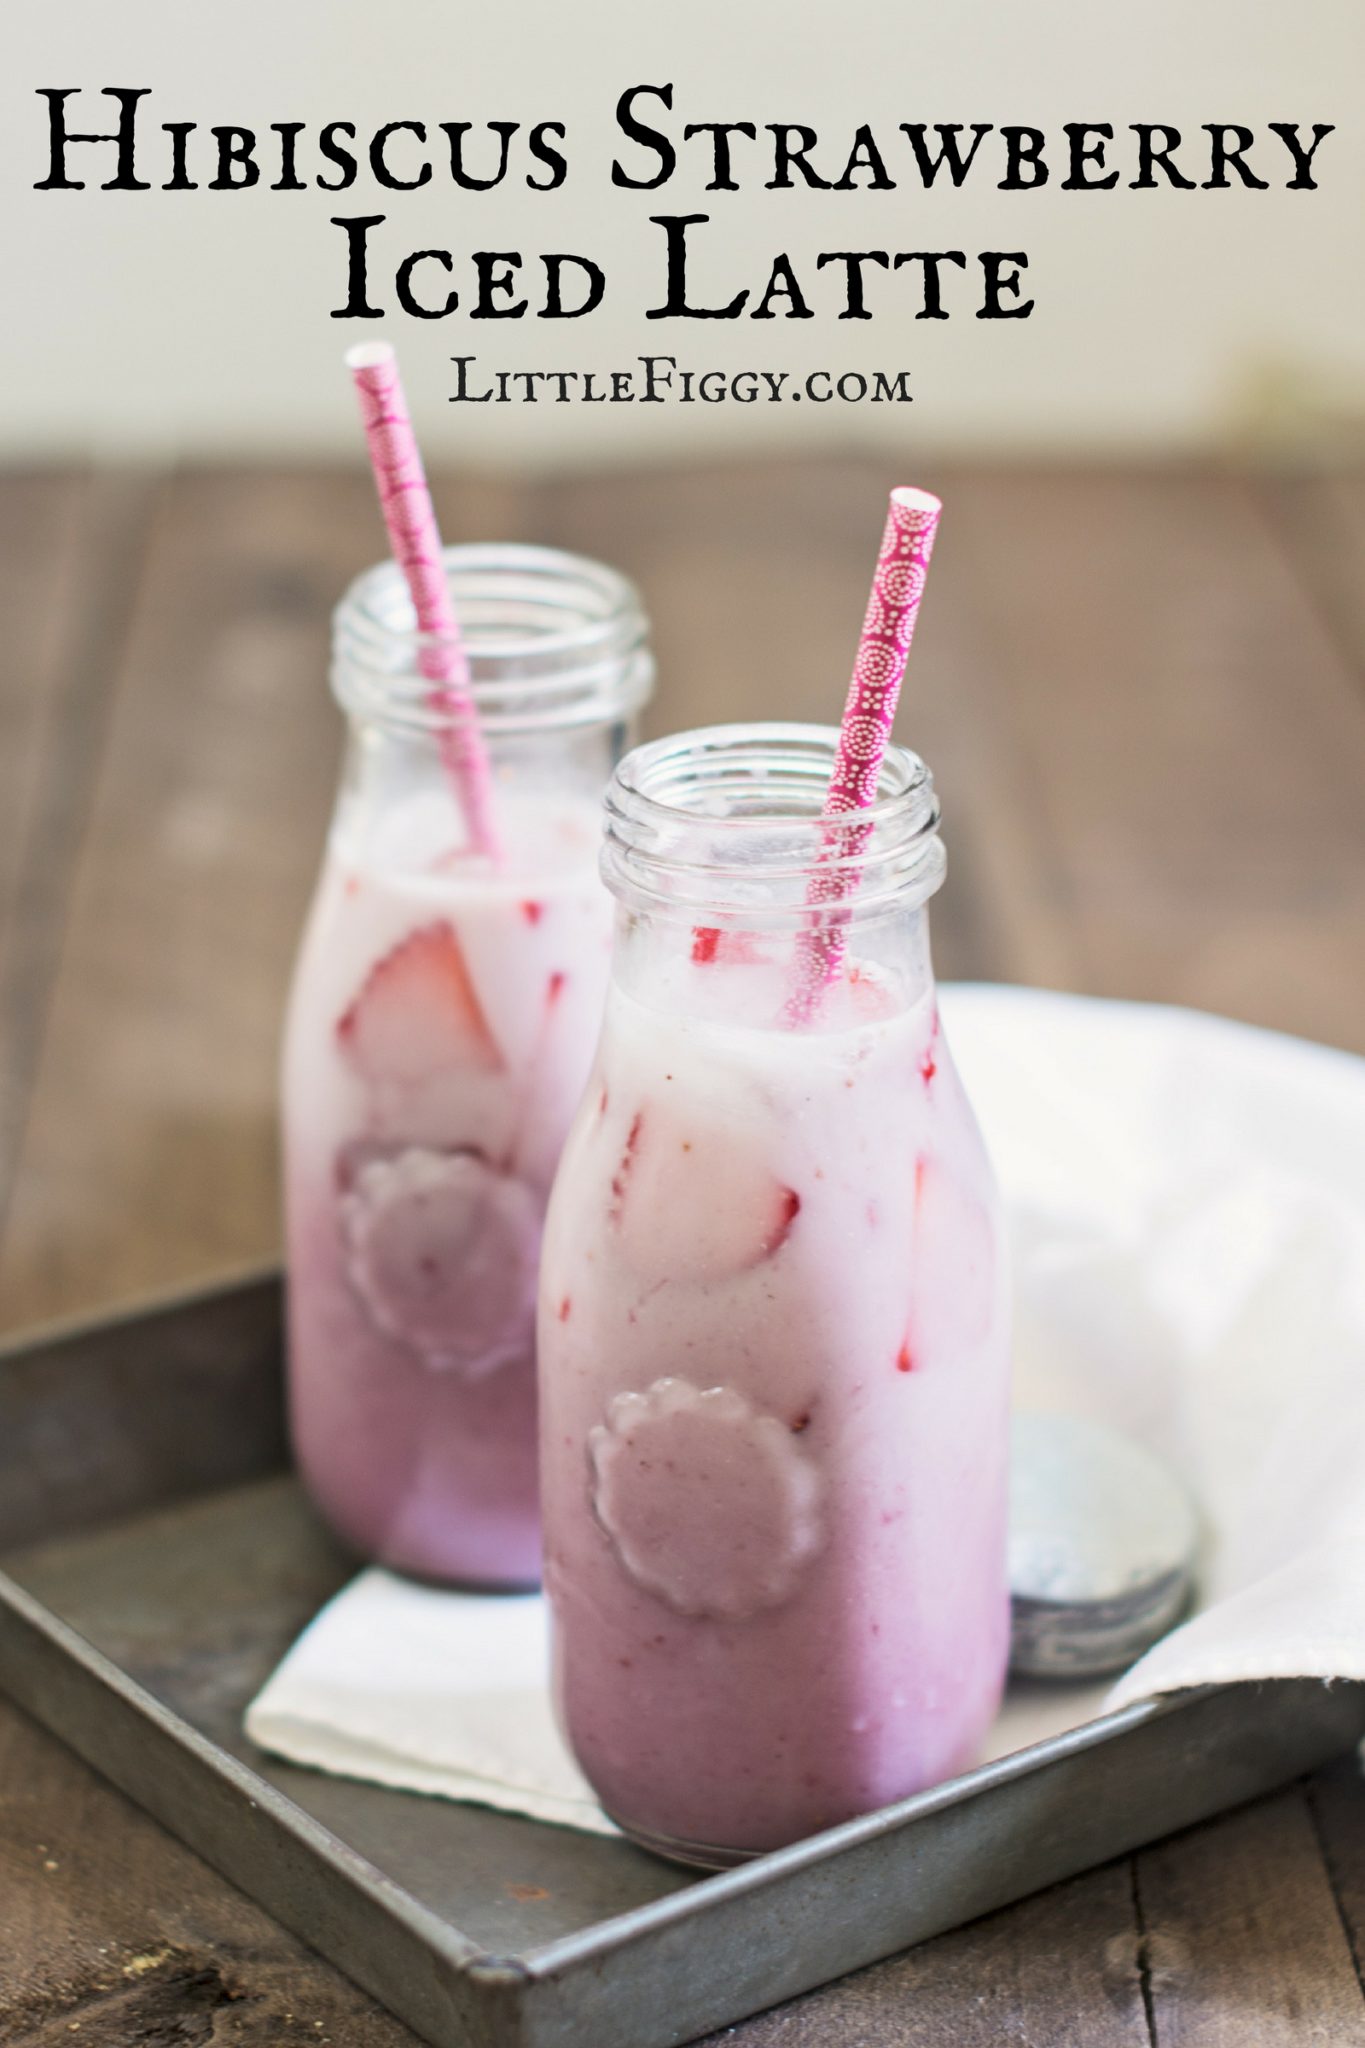 Hibiscus Strawberry Iced Latte - Little Figgy Food